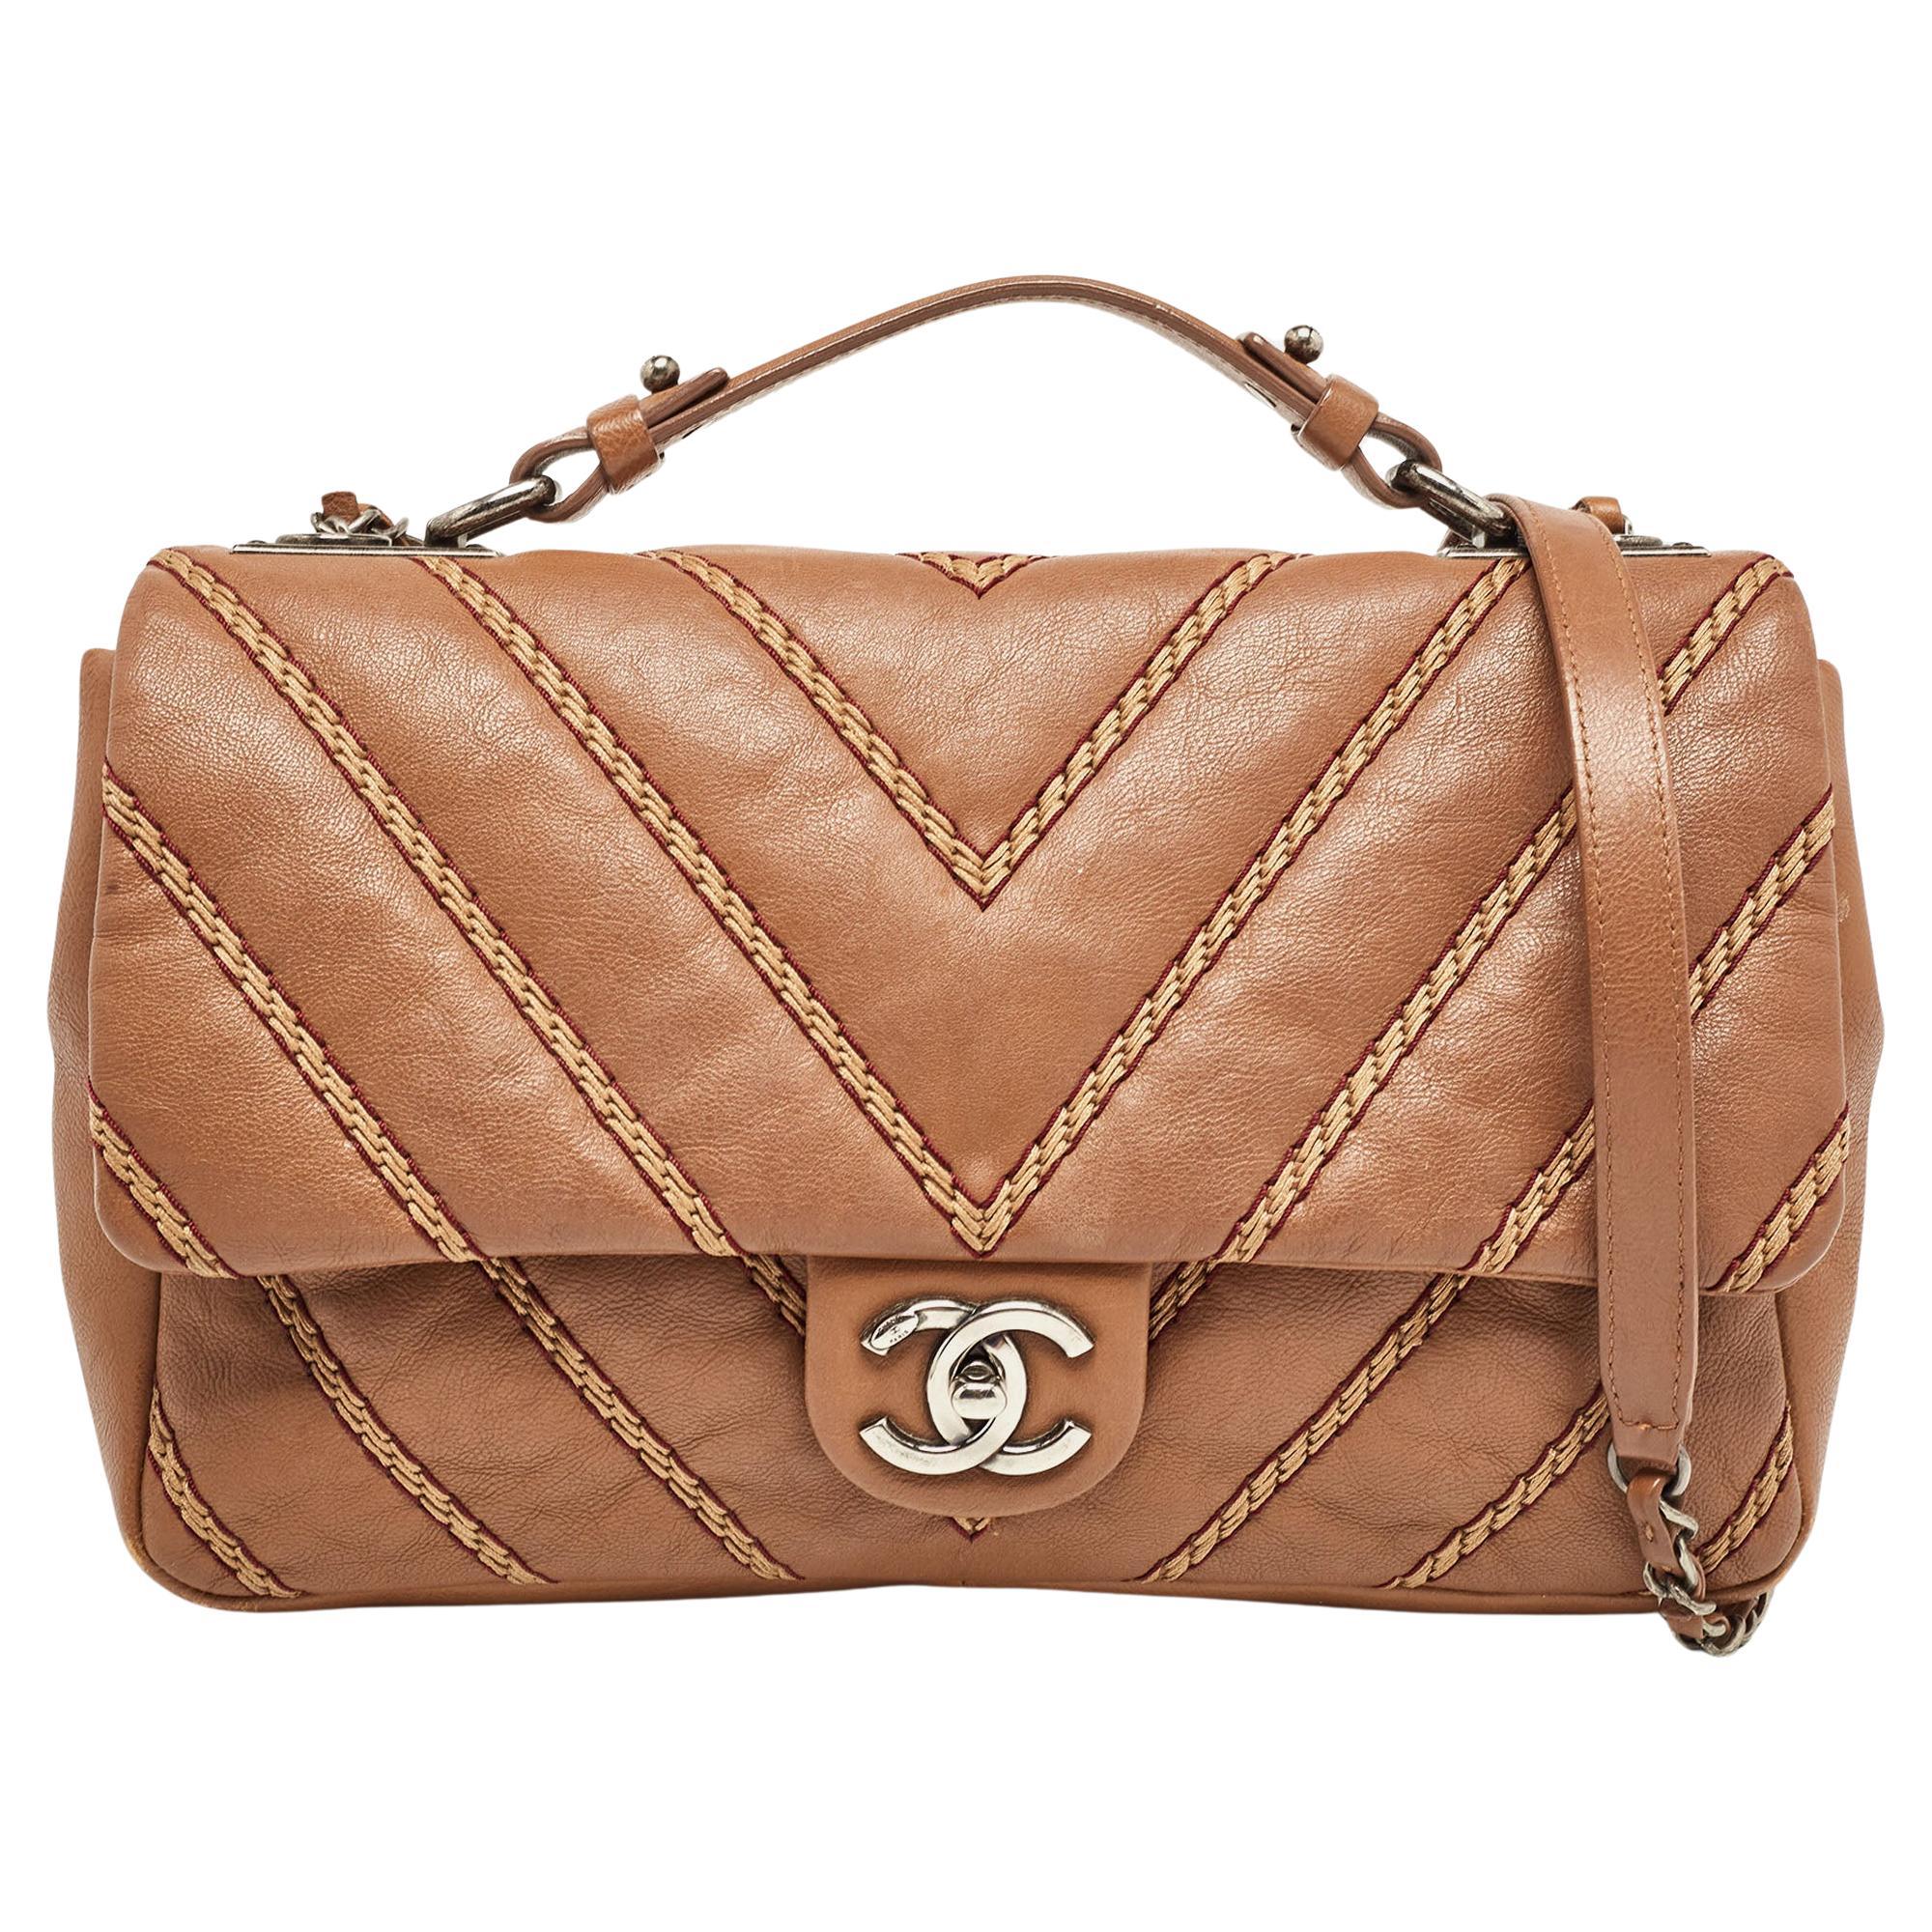 Chanel Brown Chevron Stitched Leather Classic Top Handle Bag For Sale